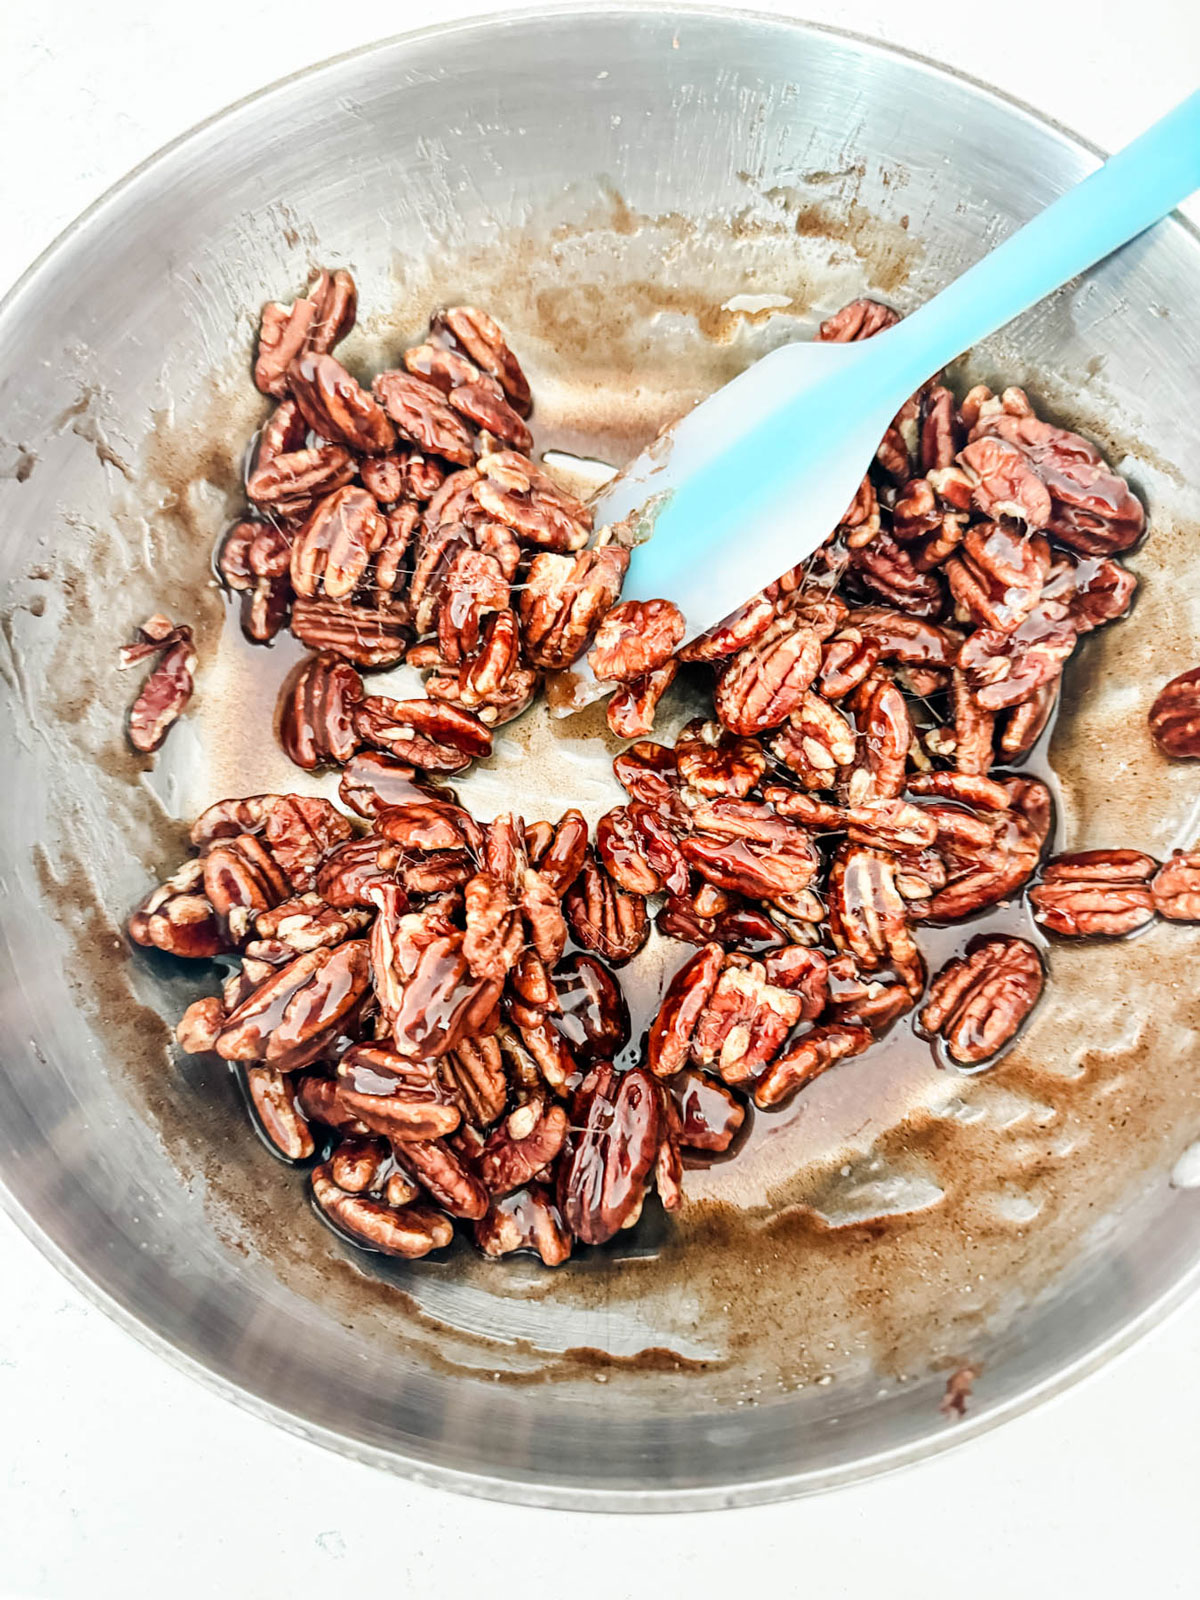 Pecans being stirred into a spiced sugar mixture in a saucepan.